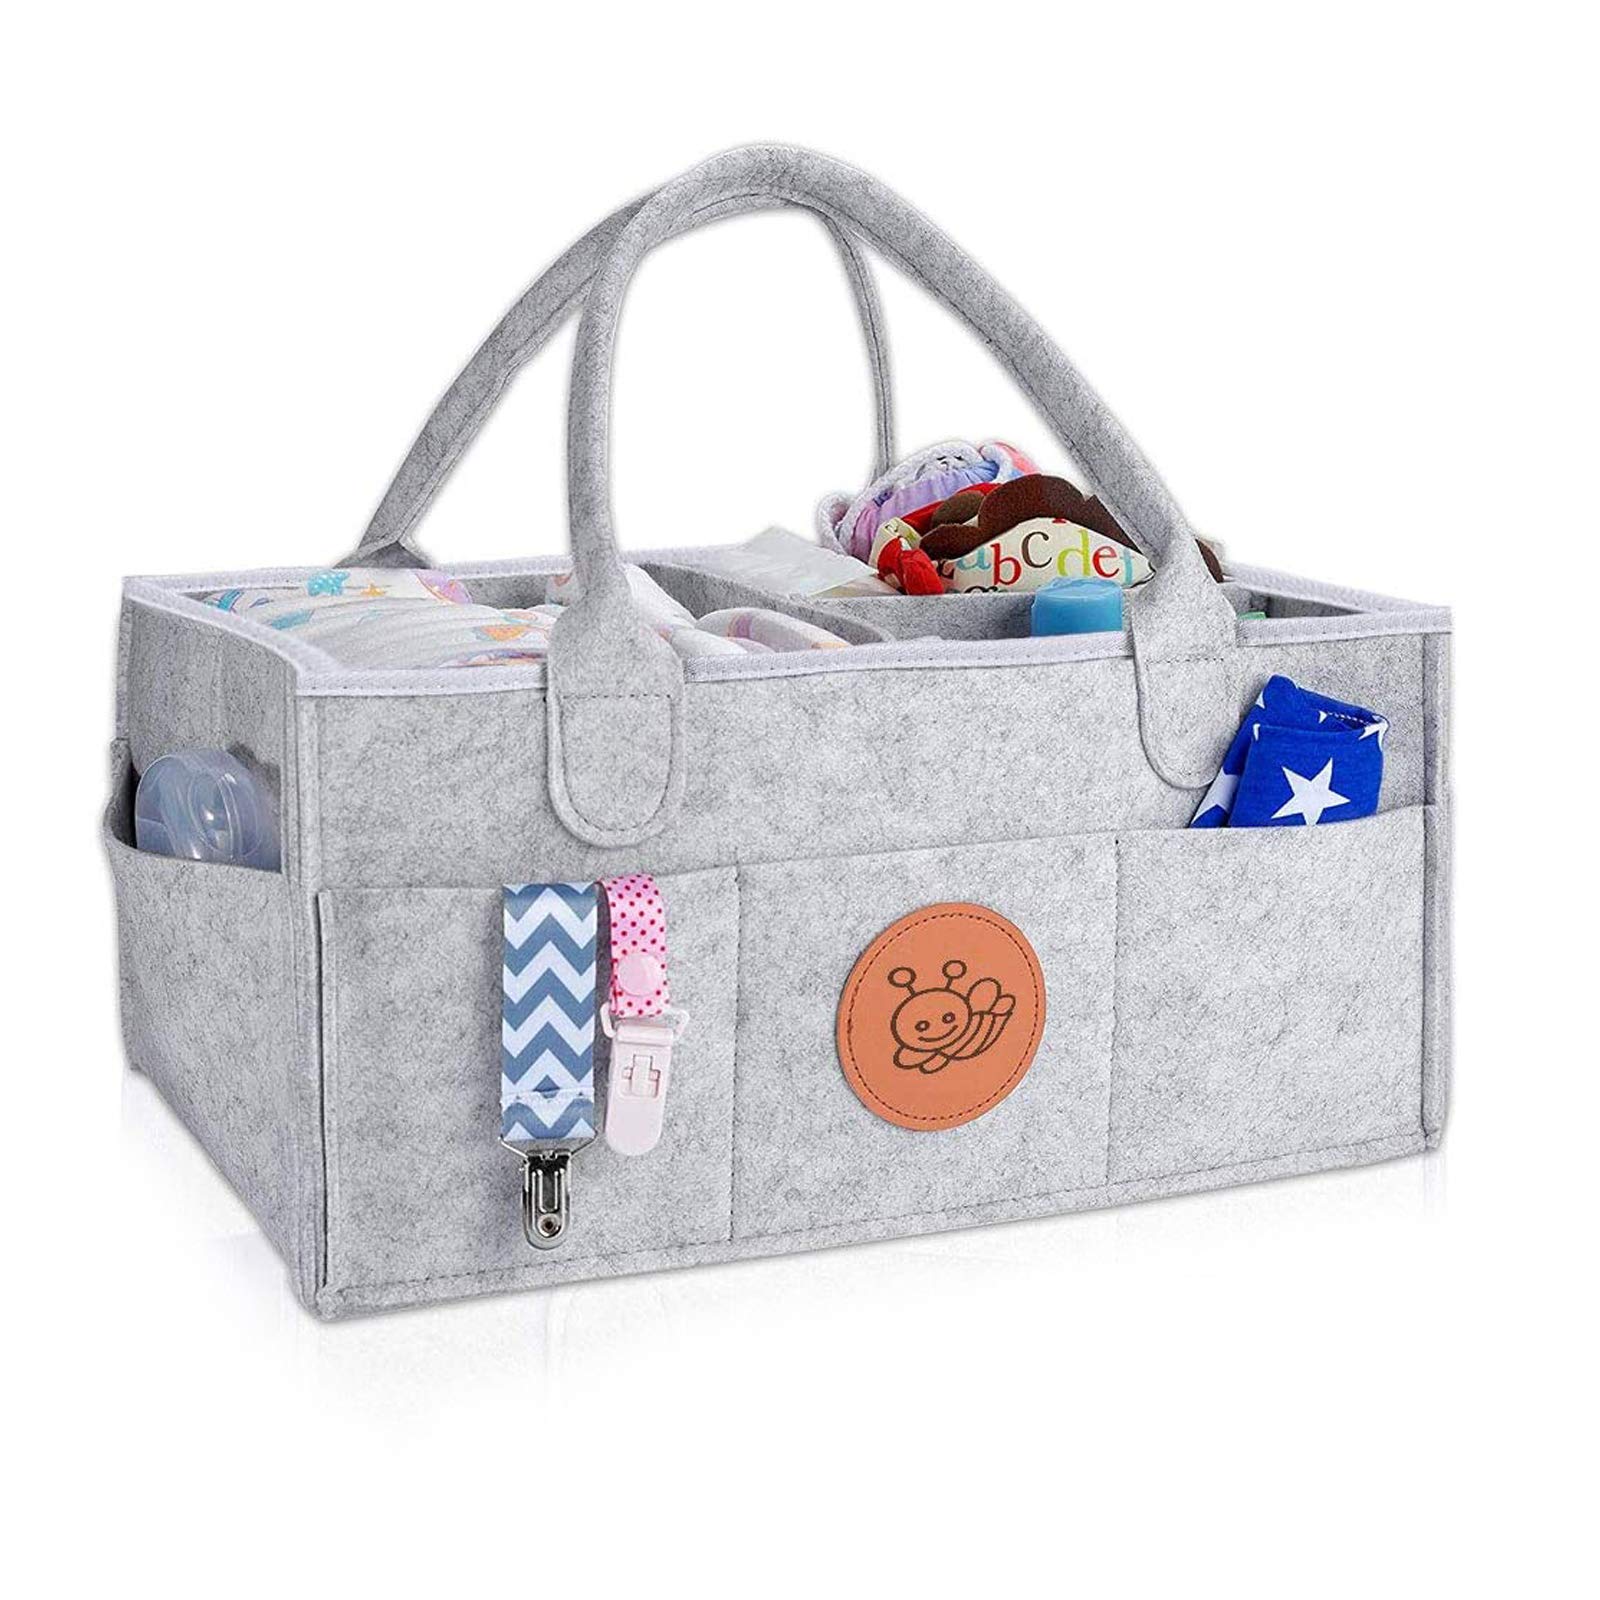 Newthinking Baby Nappy Caddy Organiser, Portable Baby Diaper Caddy Organizer with Changeable Compartments, Felt Nappy Change Caddy for Girls and Boys, Newborn Essentials, Grey